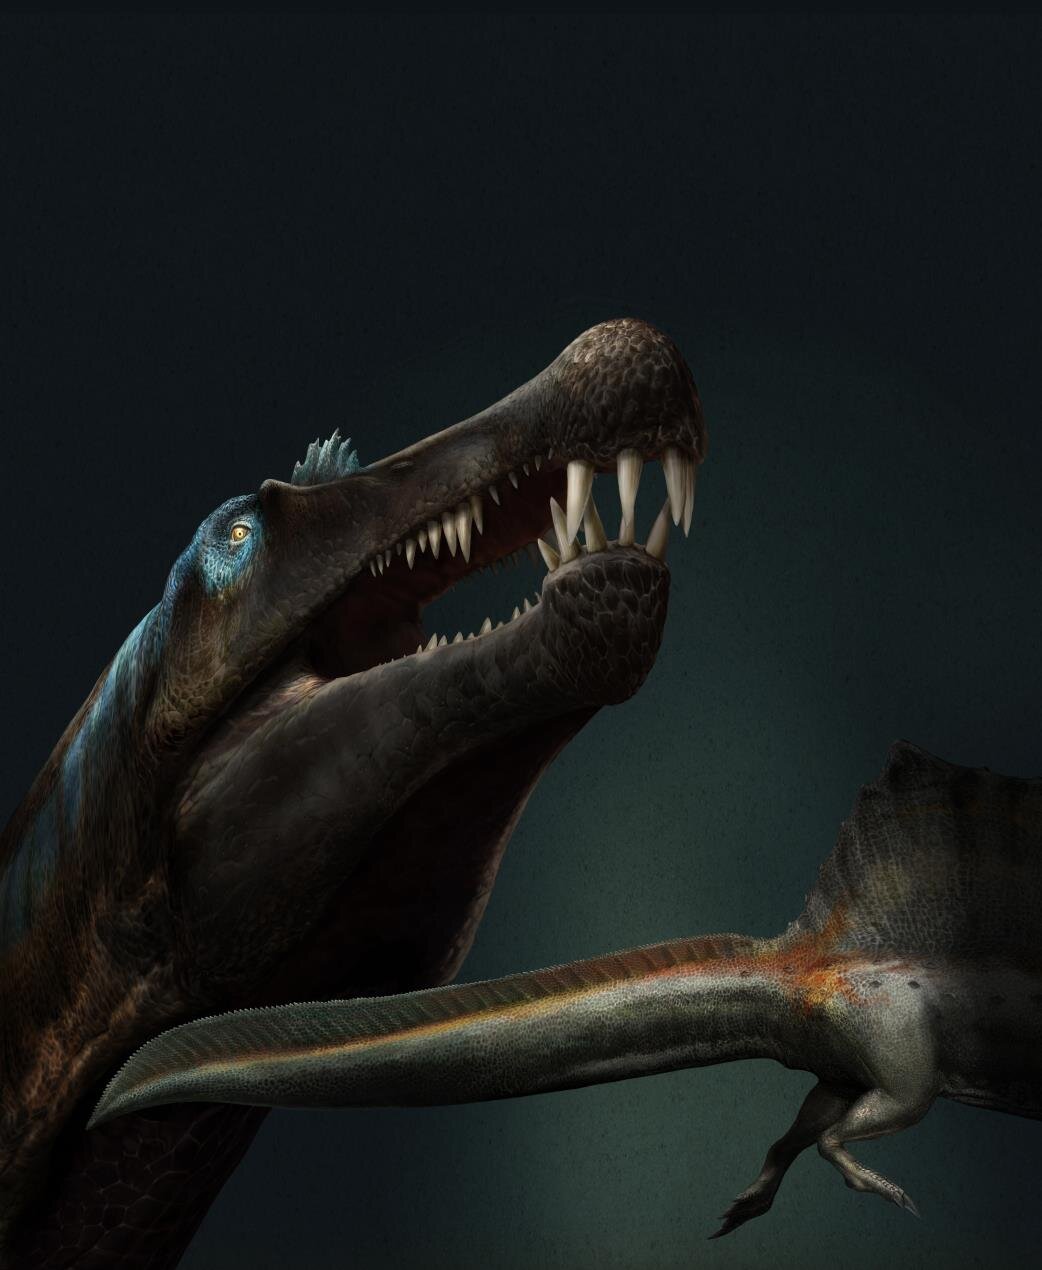 Dino teeth research prove giant predatory dinosaur lived in water - Phys.org